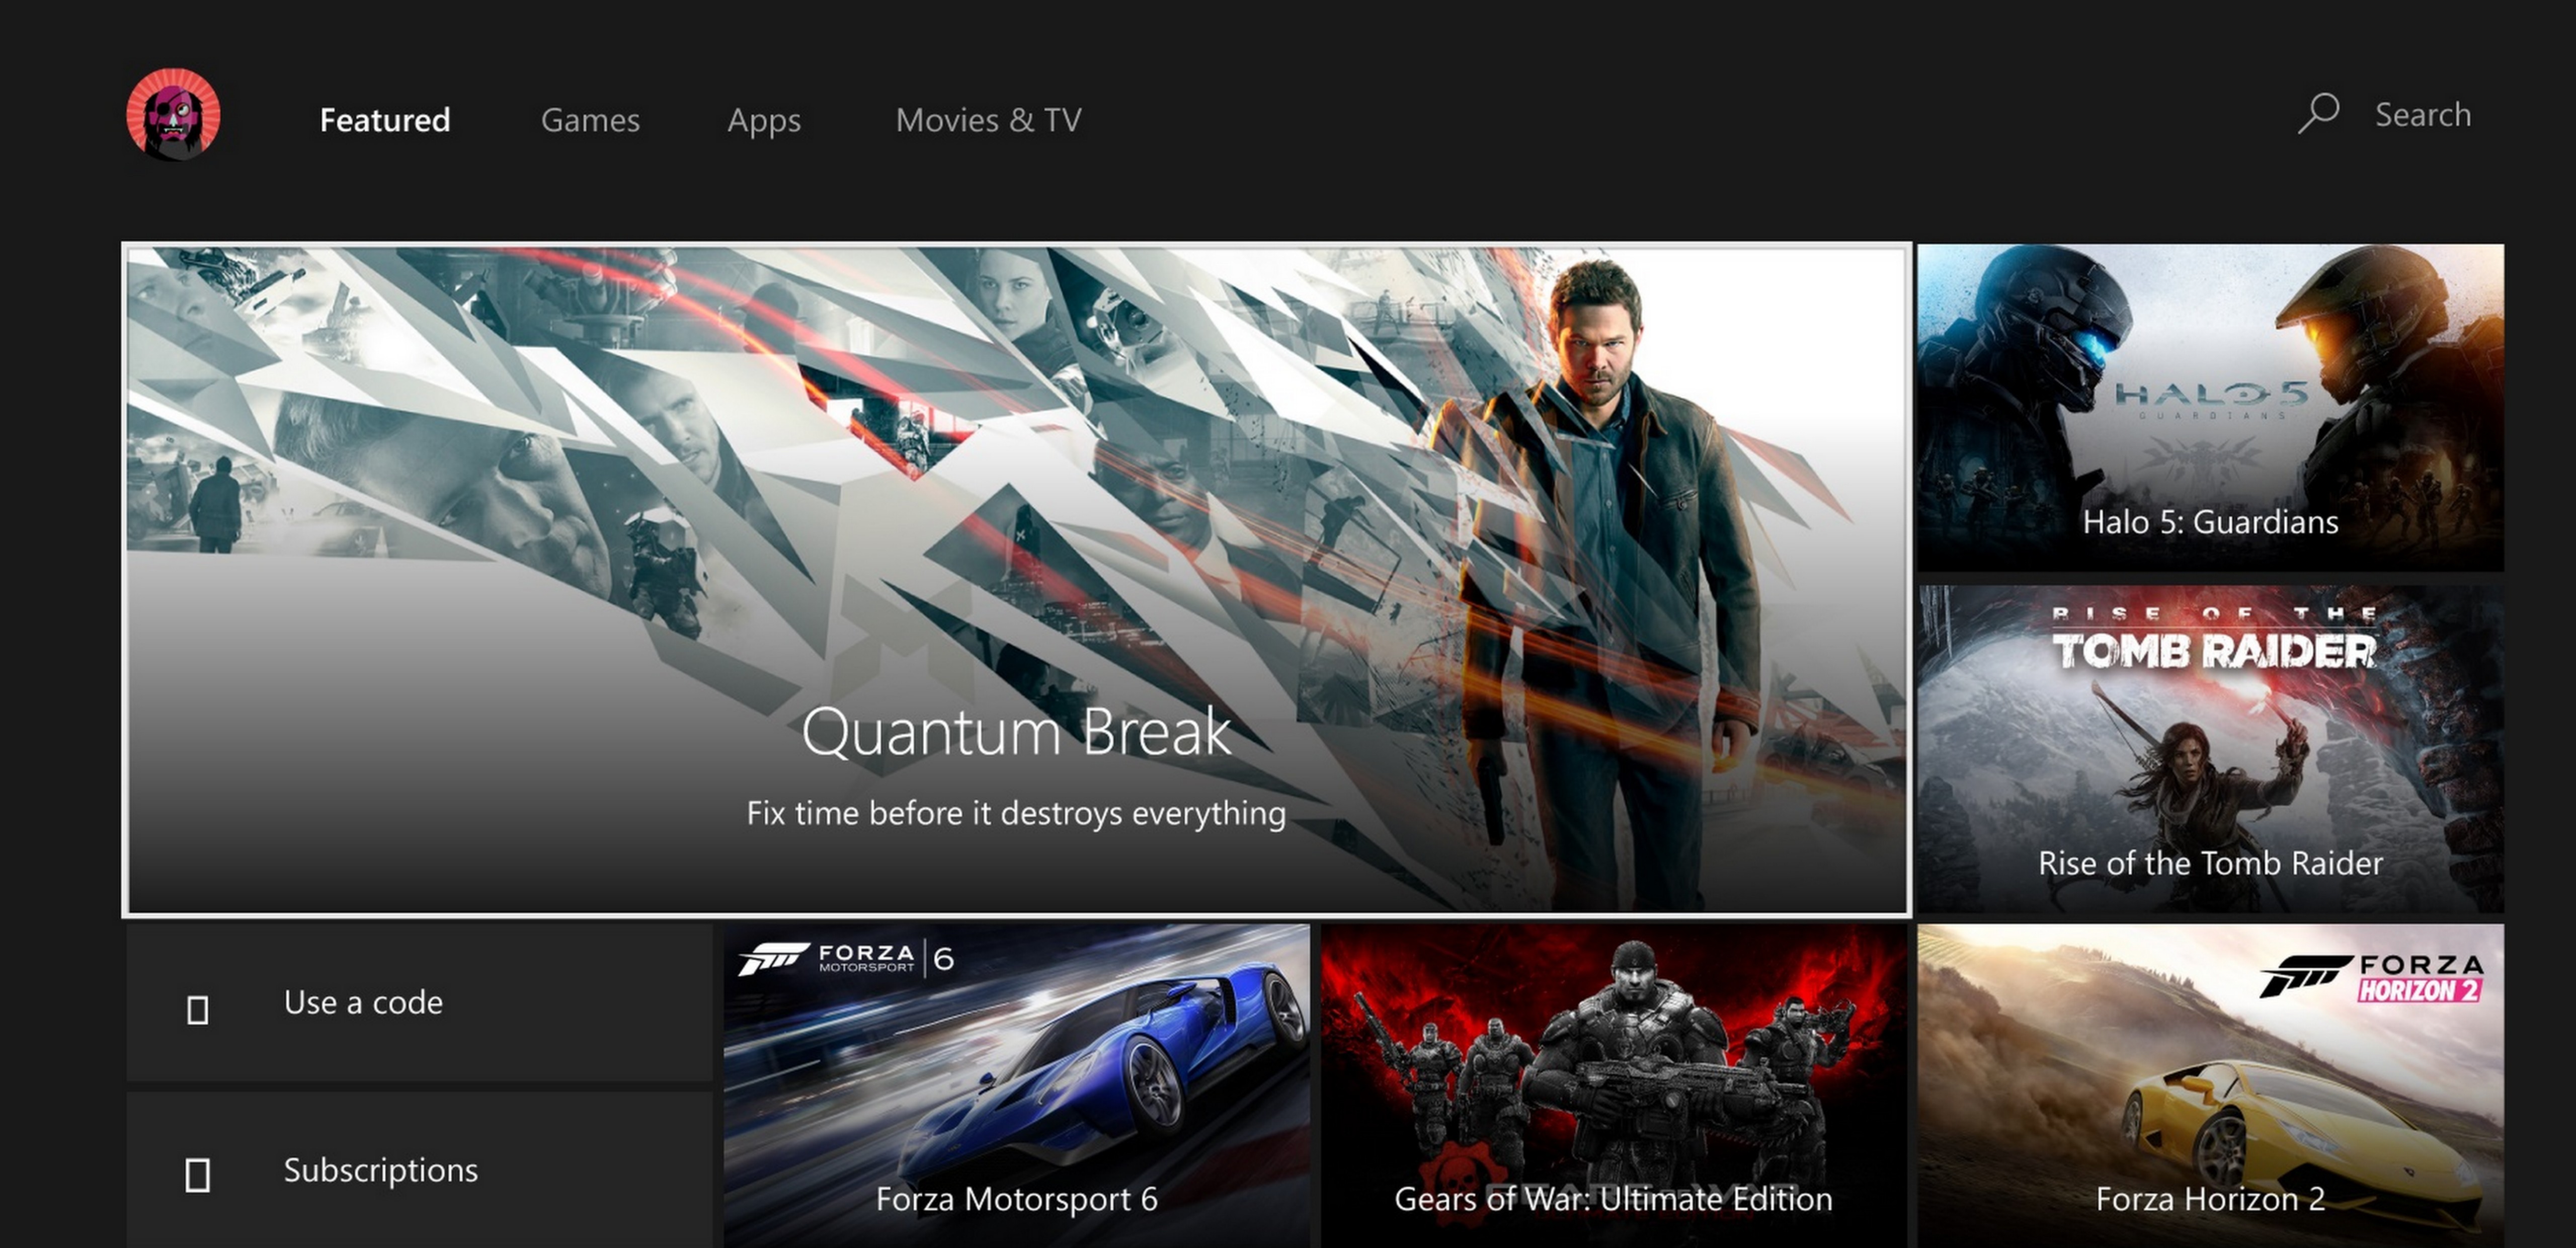 New Content, Cortana Integration and More Coming in the Xbox Summer Update